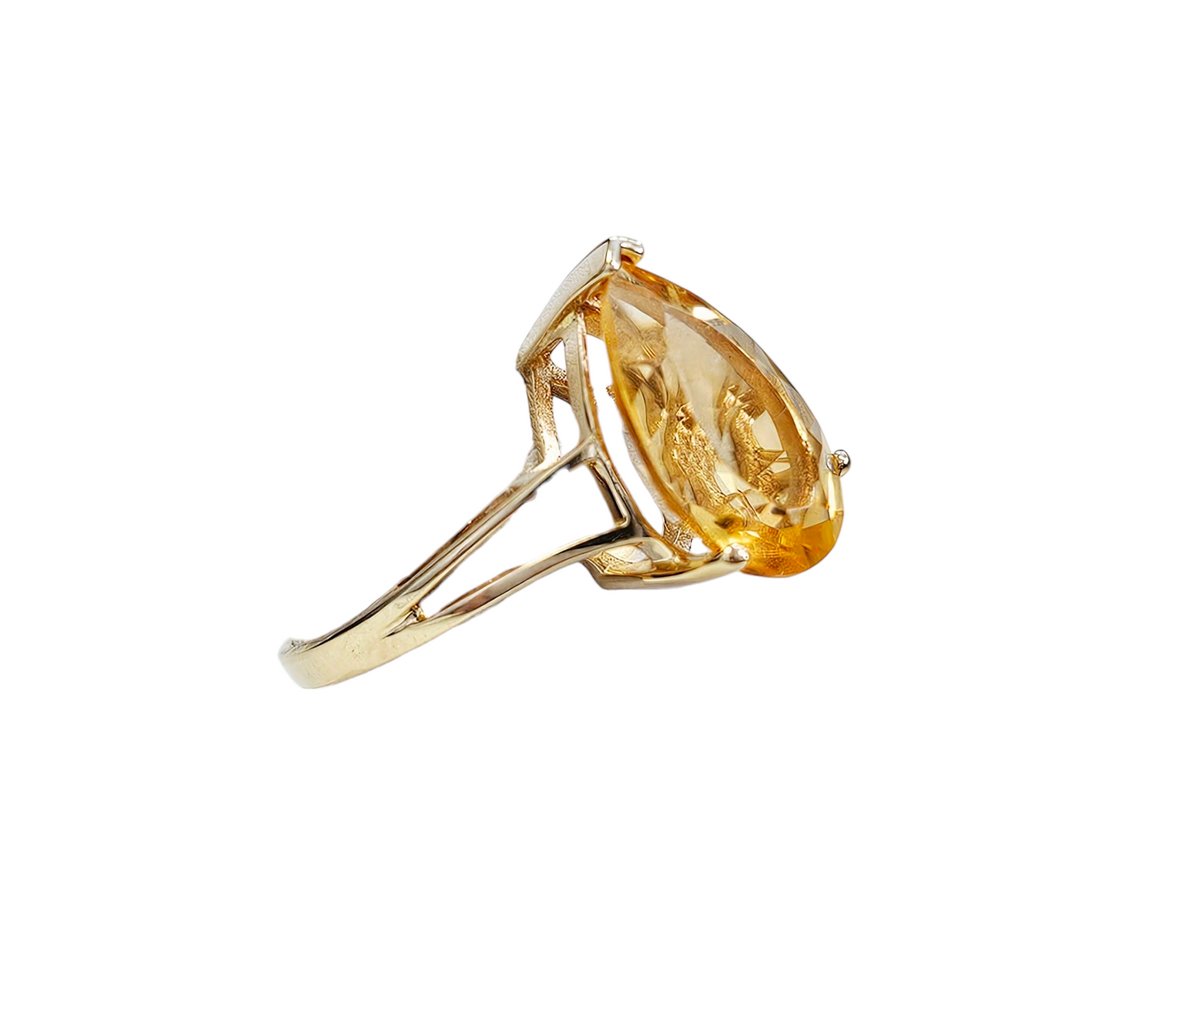 Pear-Shaped Citrine Solitaire Ring with Split Shank made in 10-Karat Yellow Gold